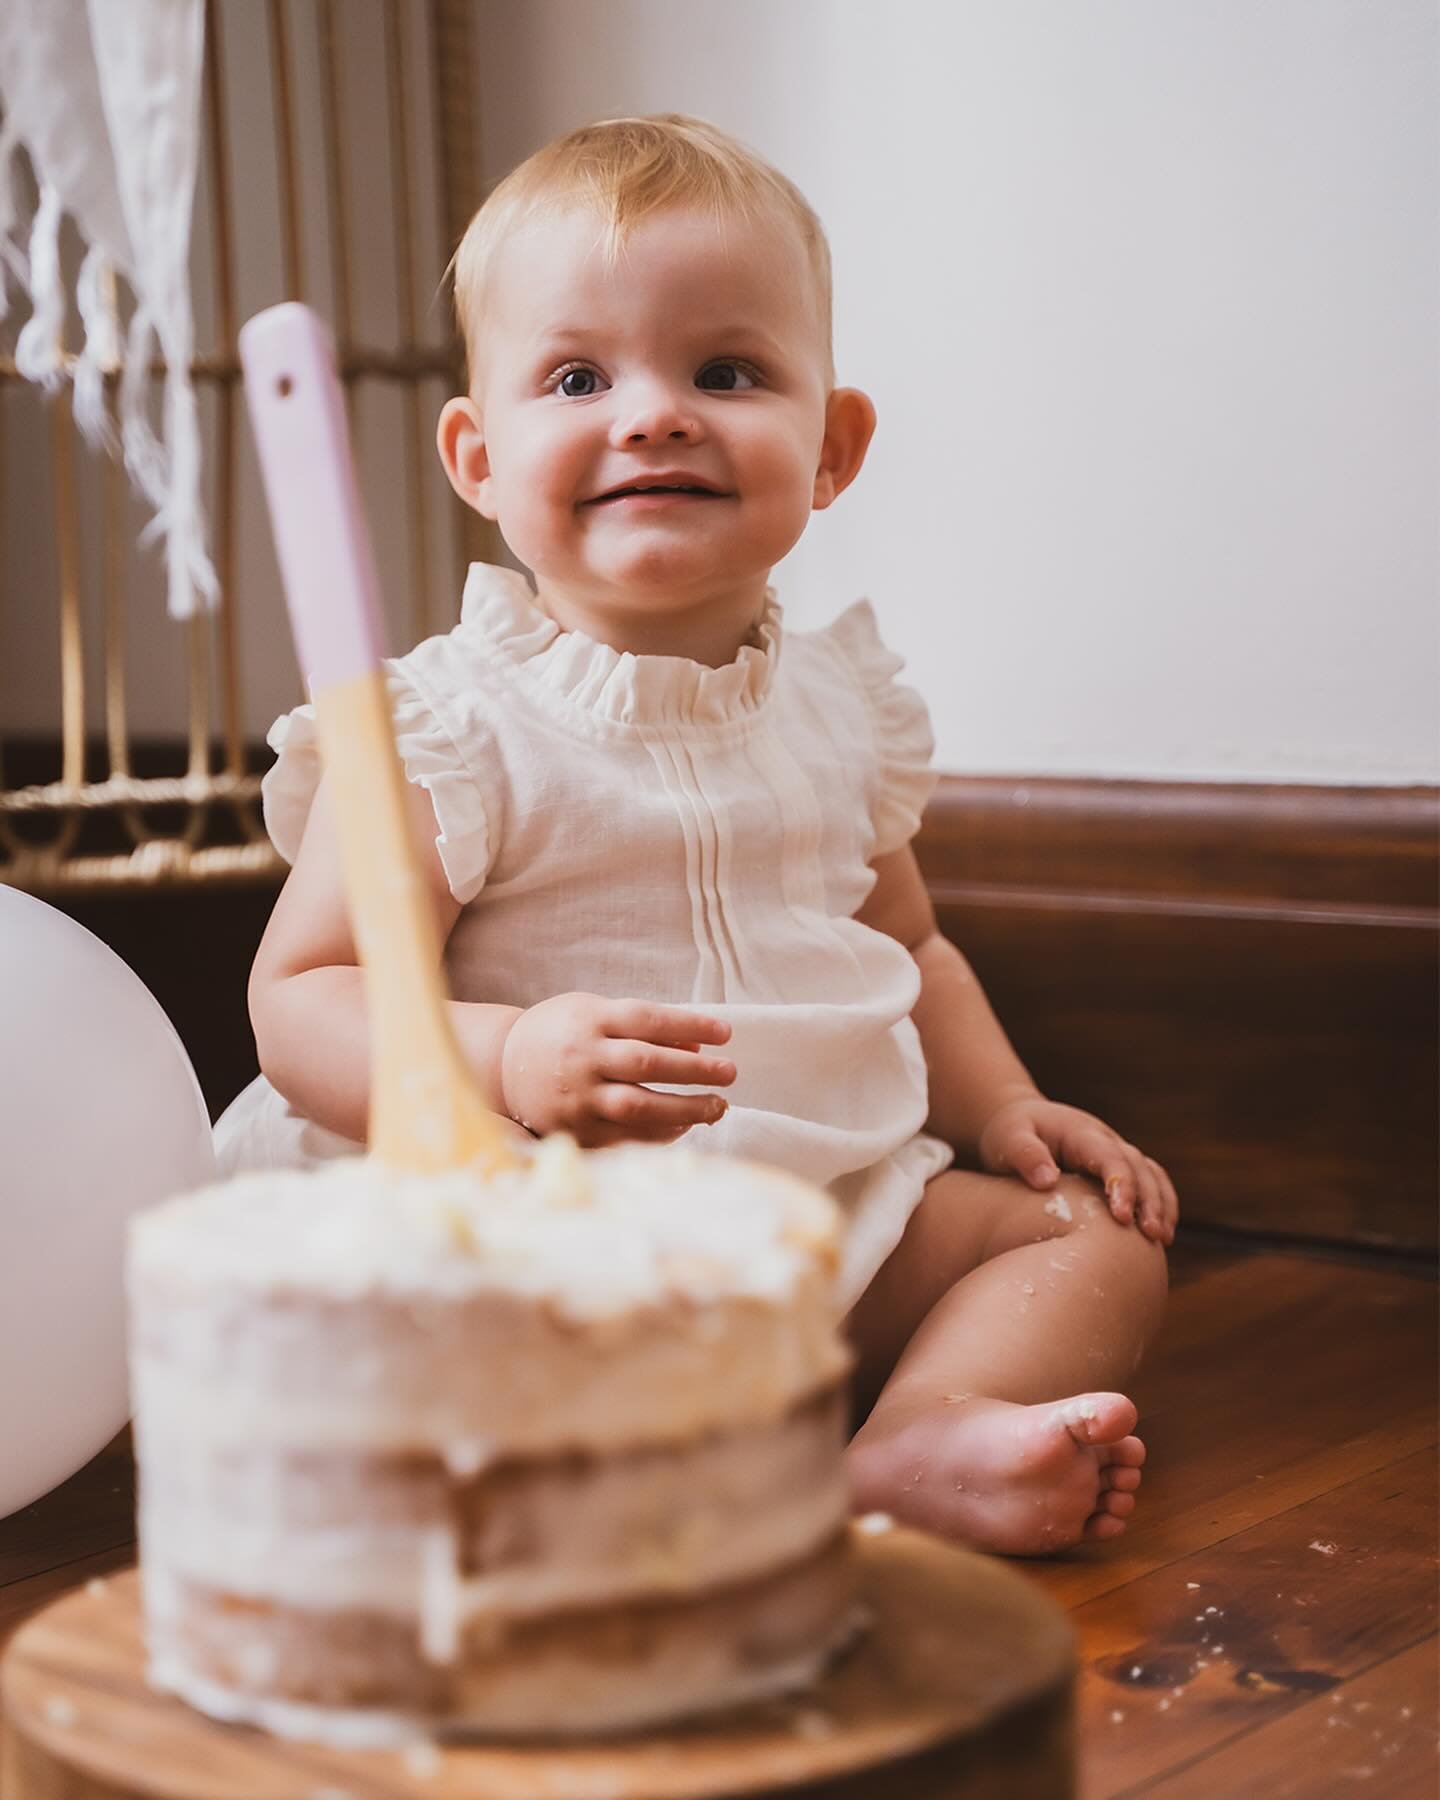 Sweet memories in the making 🎂 

We love documenting these magic milestones, especially when a family returns to us for a cake smash and we get to see how much their little one has grown since their newborn session. 🤎